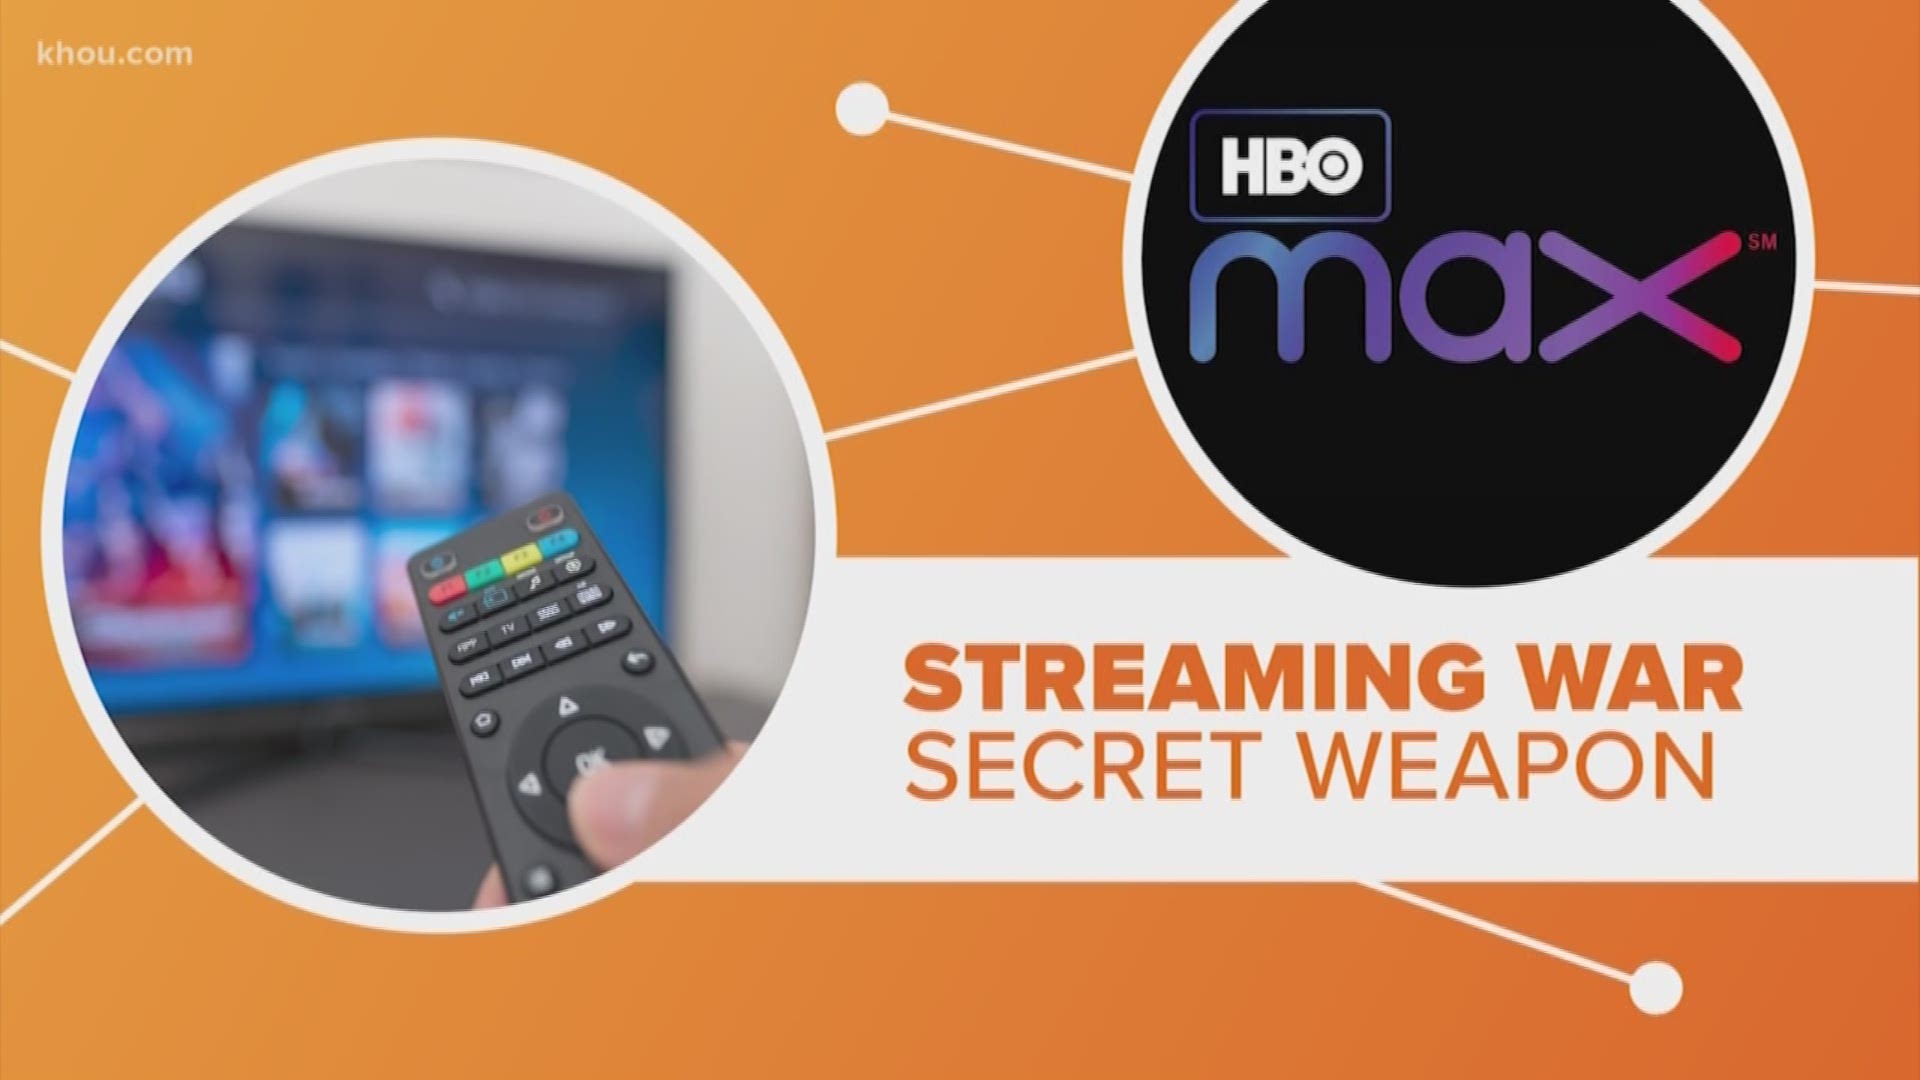 Every TV Series Streaming on HBO Max at Launch